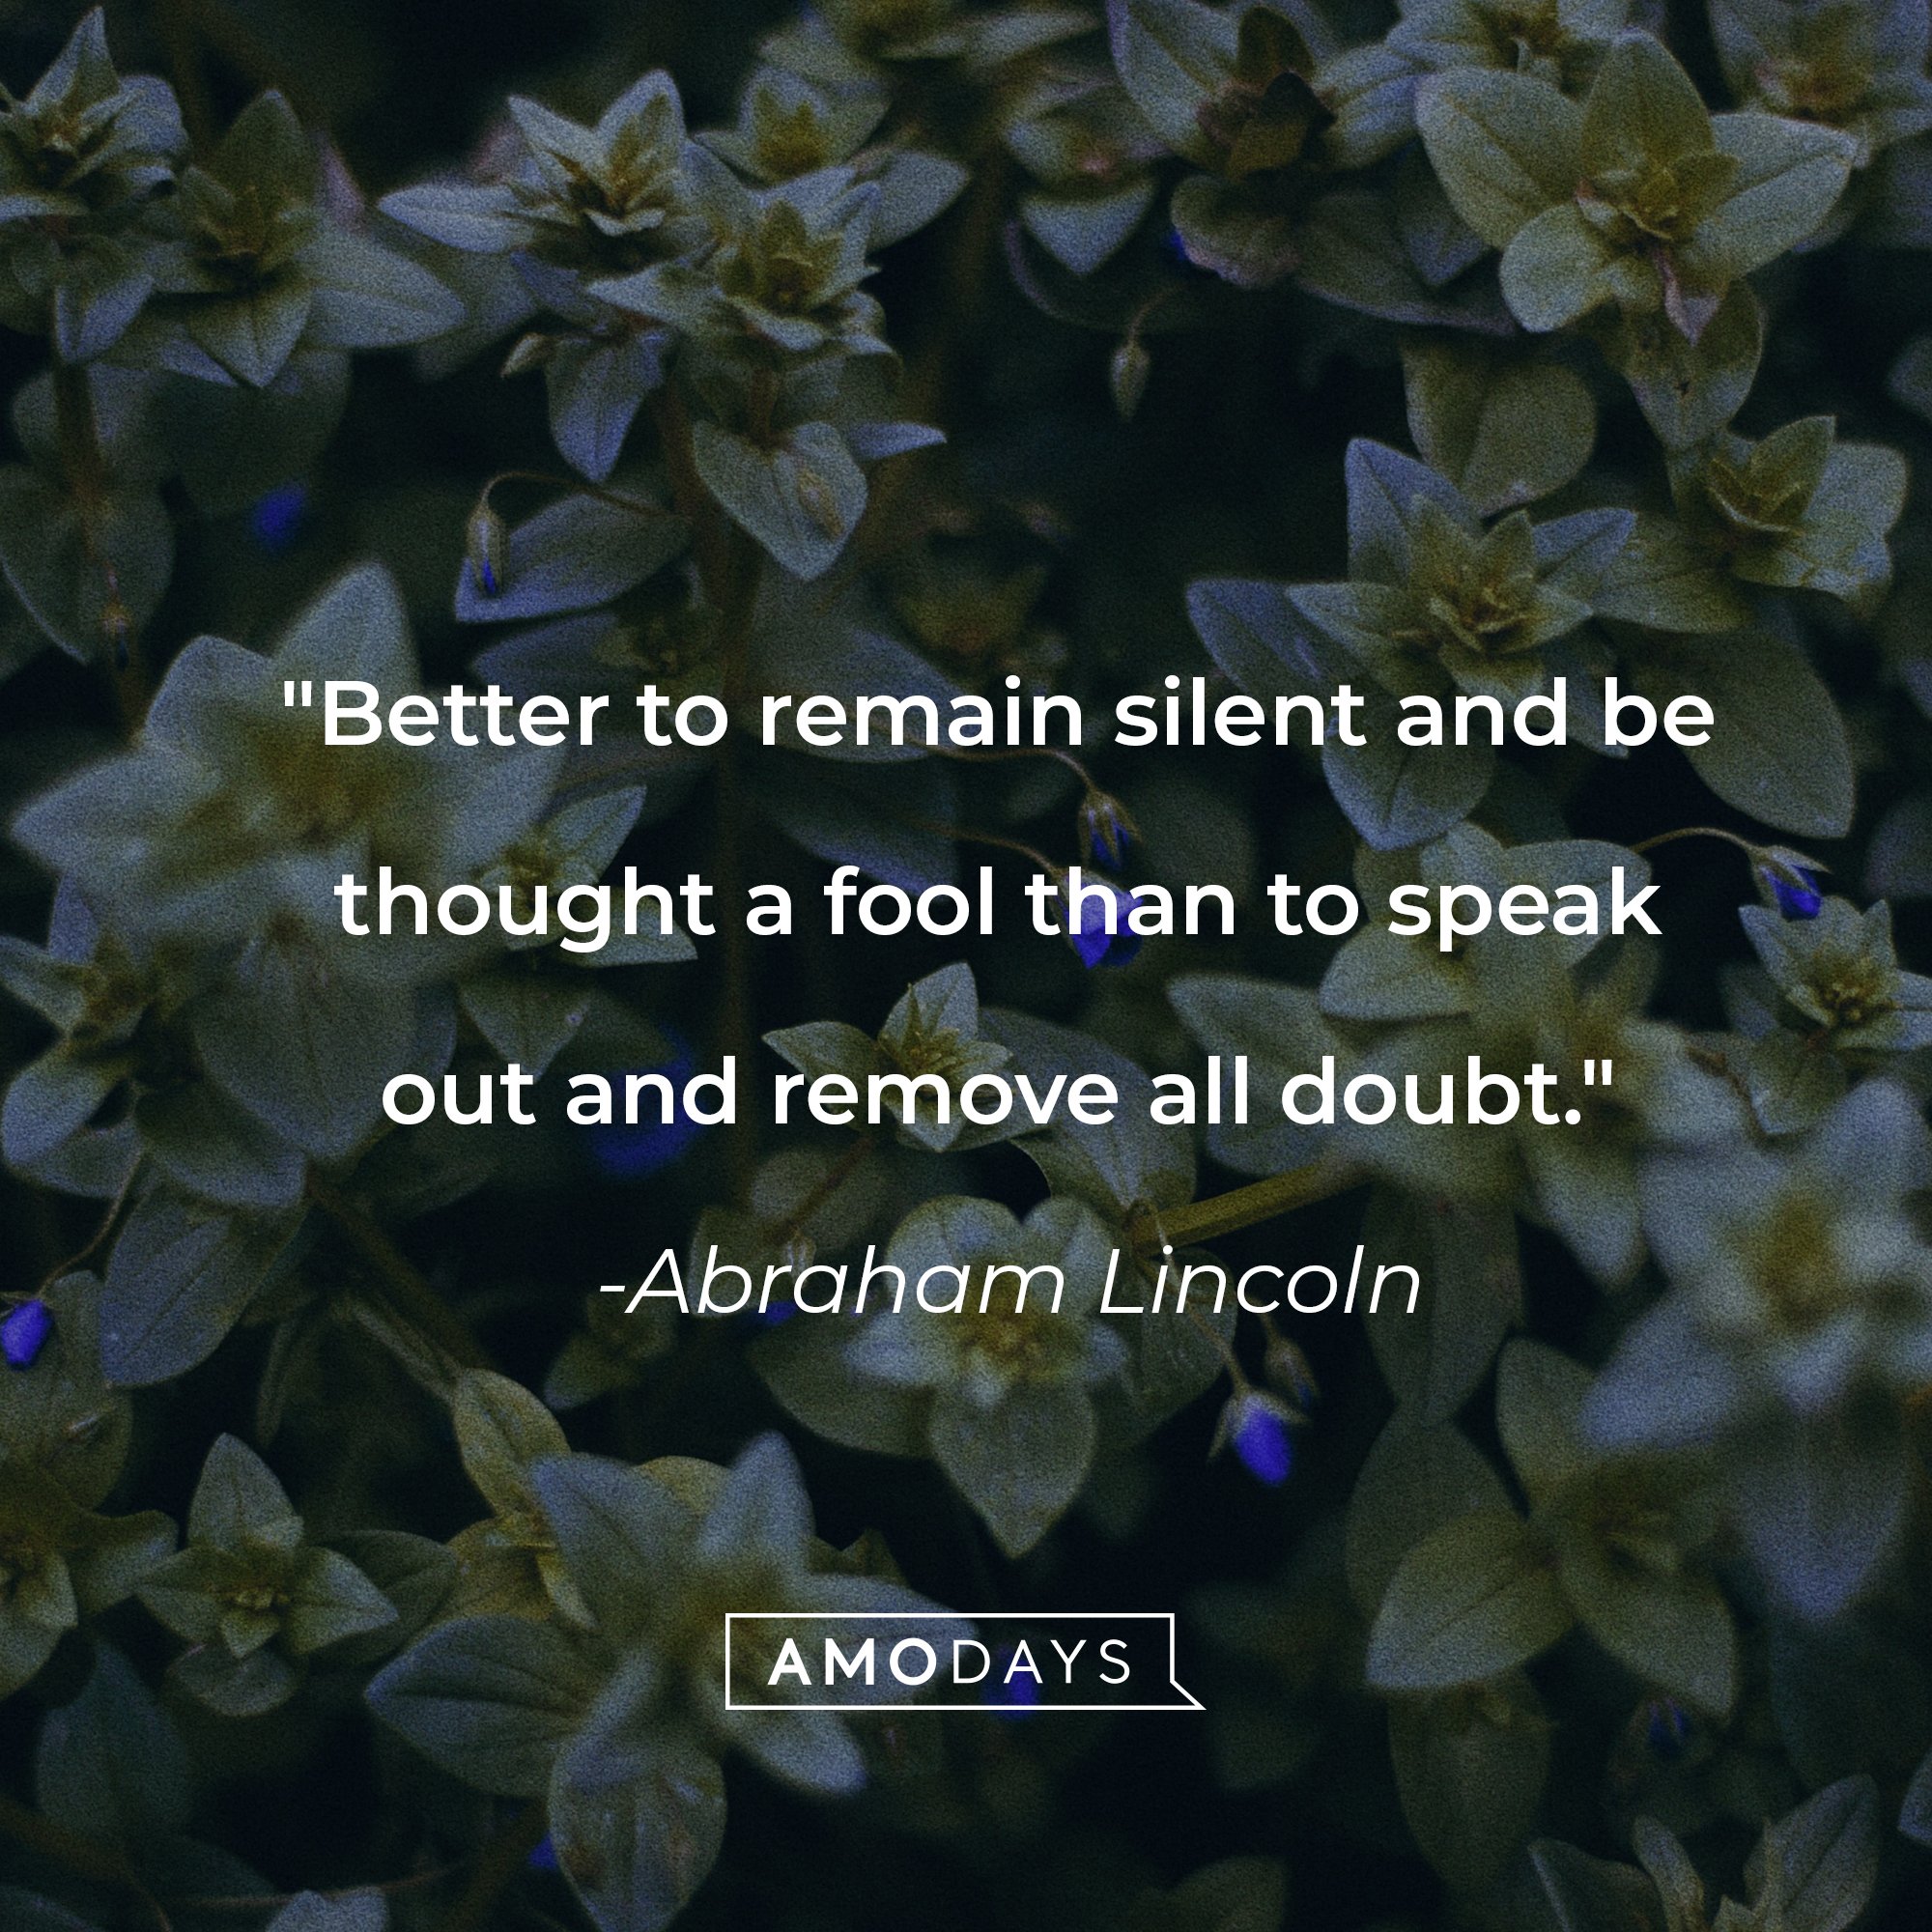 Abraham Lincoln's quote: "Better to remain silent and be thought a fool than to speak out and remove all doubt." | Image: AmoDays 